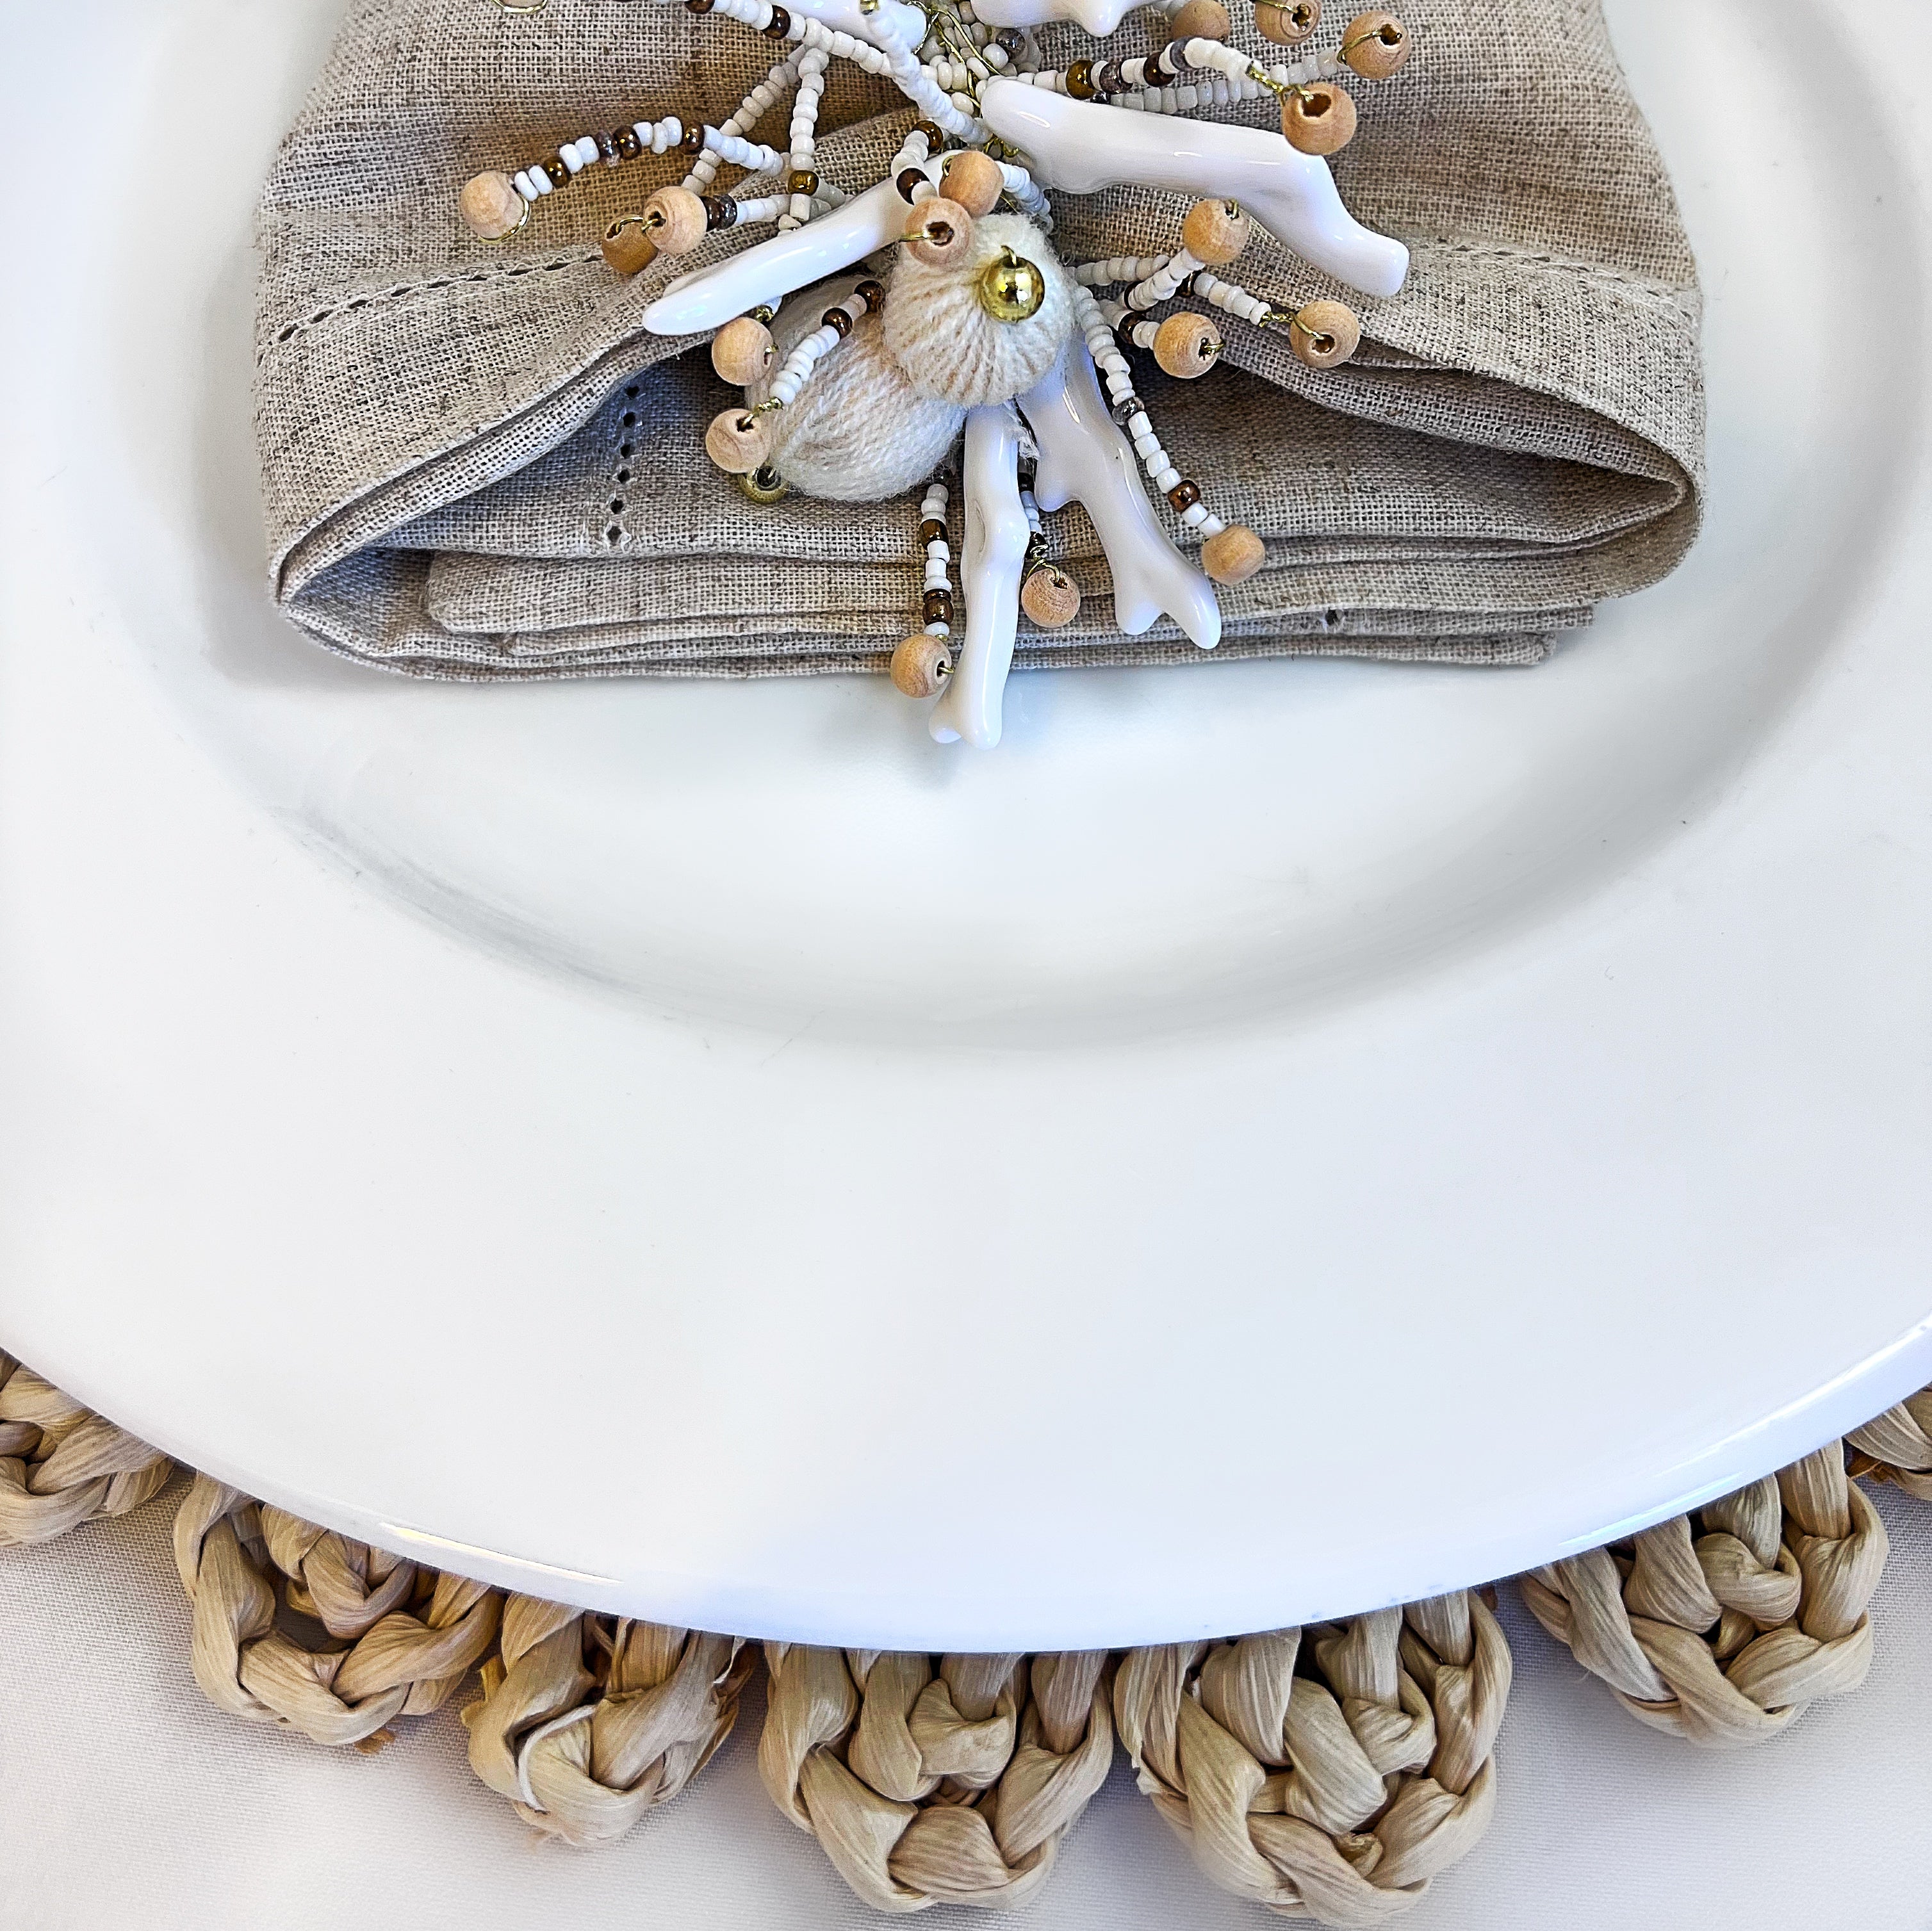 Tablescape table accessories, beaded napkin rings, linen napkins and placemats.